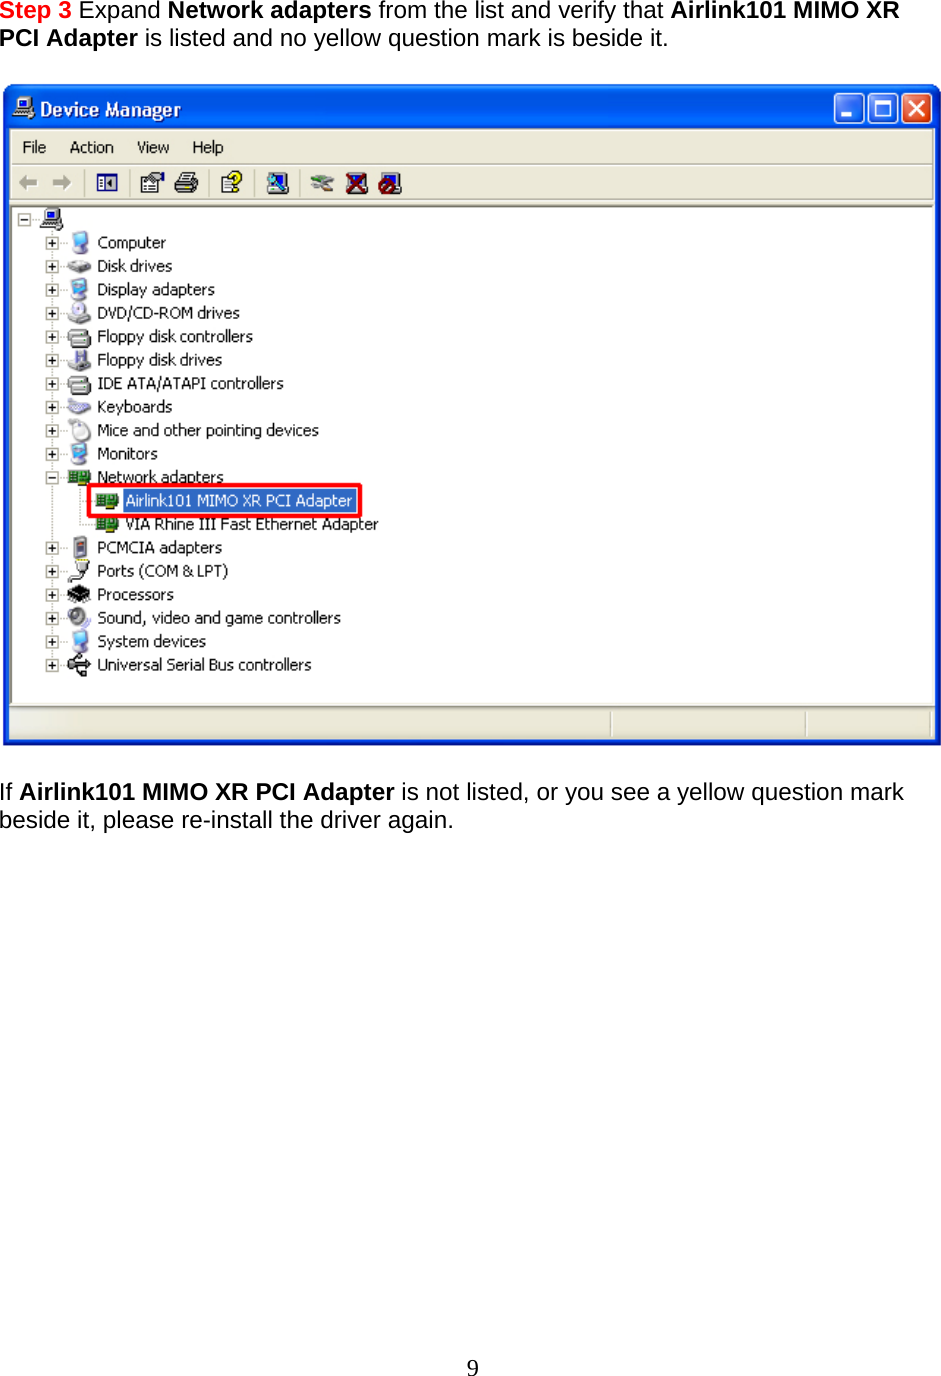 9 Step 3 Expand Network adapters from the list and verify that Airlink101 MIMO XR PCI Adapter is listed and no yellow question mark is beside it.    If Airlink101 MIMO XR PCI Adapter is not listed, or you see a yellow question mark beside it, please re-install the driver again.                 